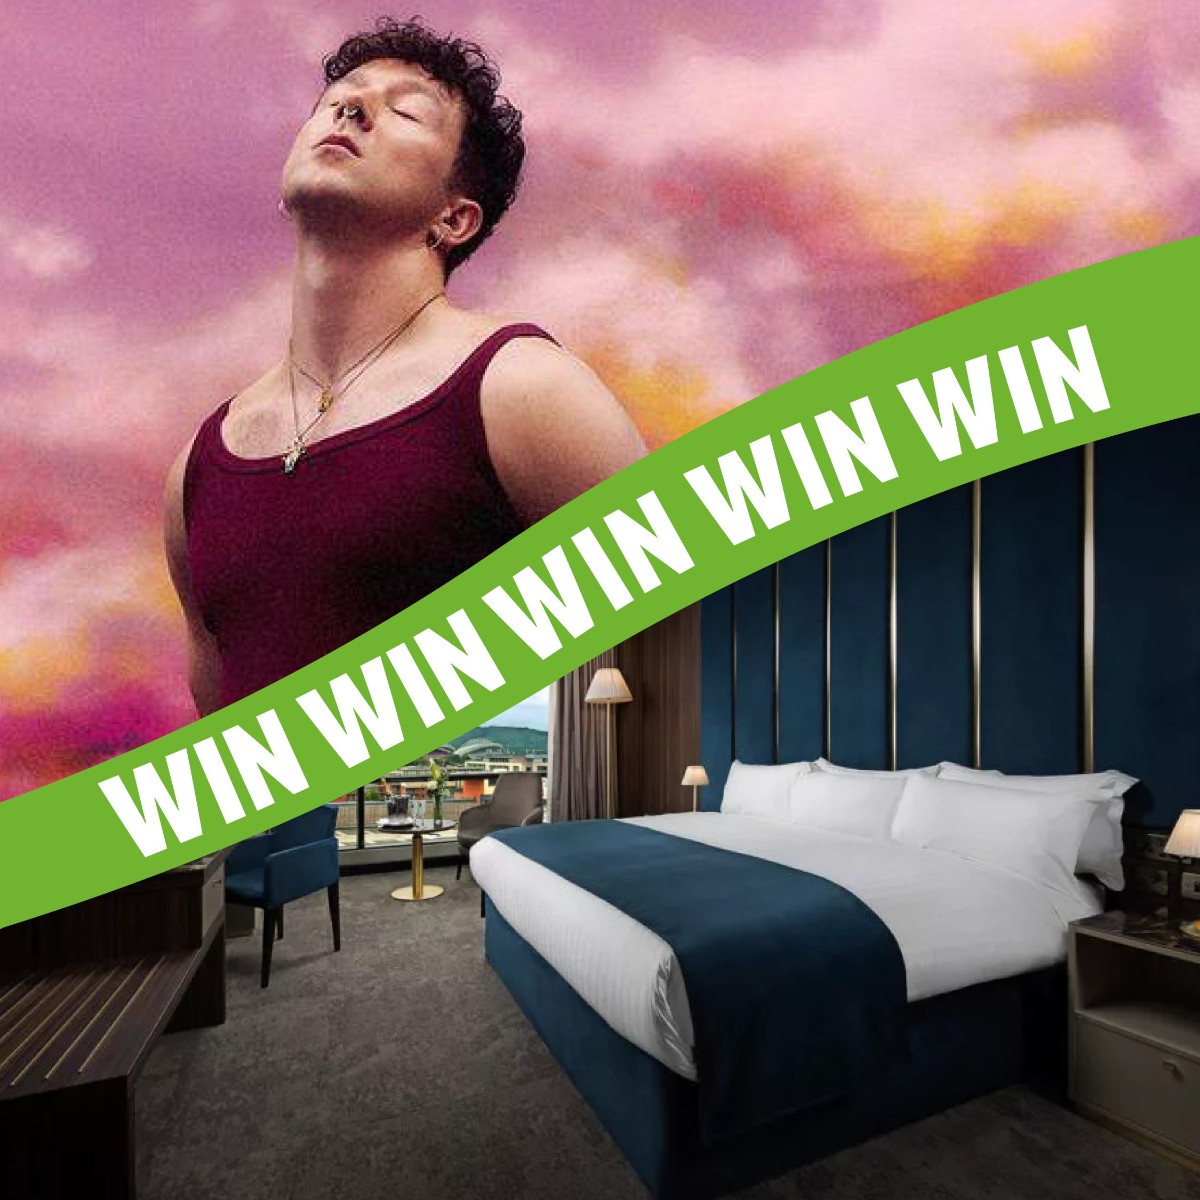 WIN WIN WIN!! Fancy an overnight stay for two at The Savoy Hotel, Limerick PLUS tickets to Moncrieff Live at the Castle for his SOLD OUT show on Sunday 5th May!! 🤯 All you have to do is head over to our Instagram page! #RiverfestLimerick #Limerick #LimerickEdgeEmbrace